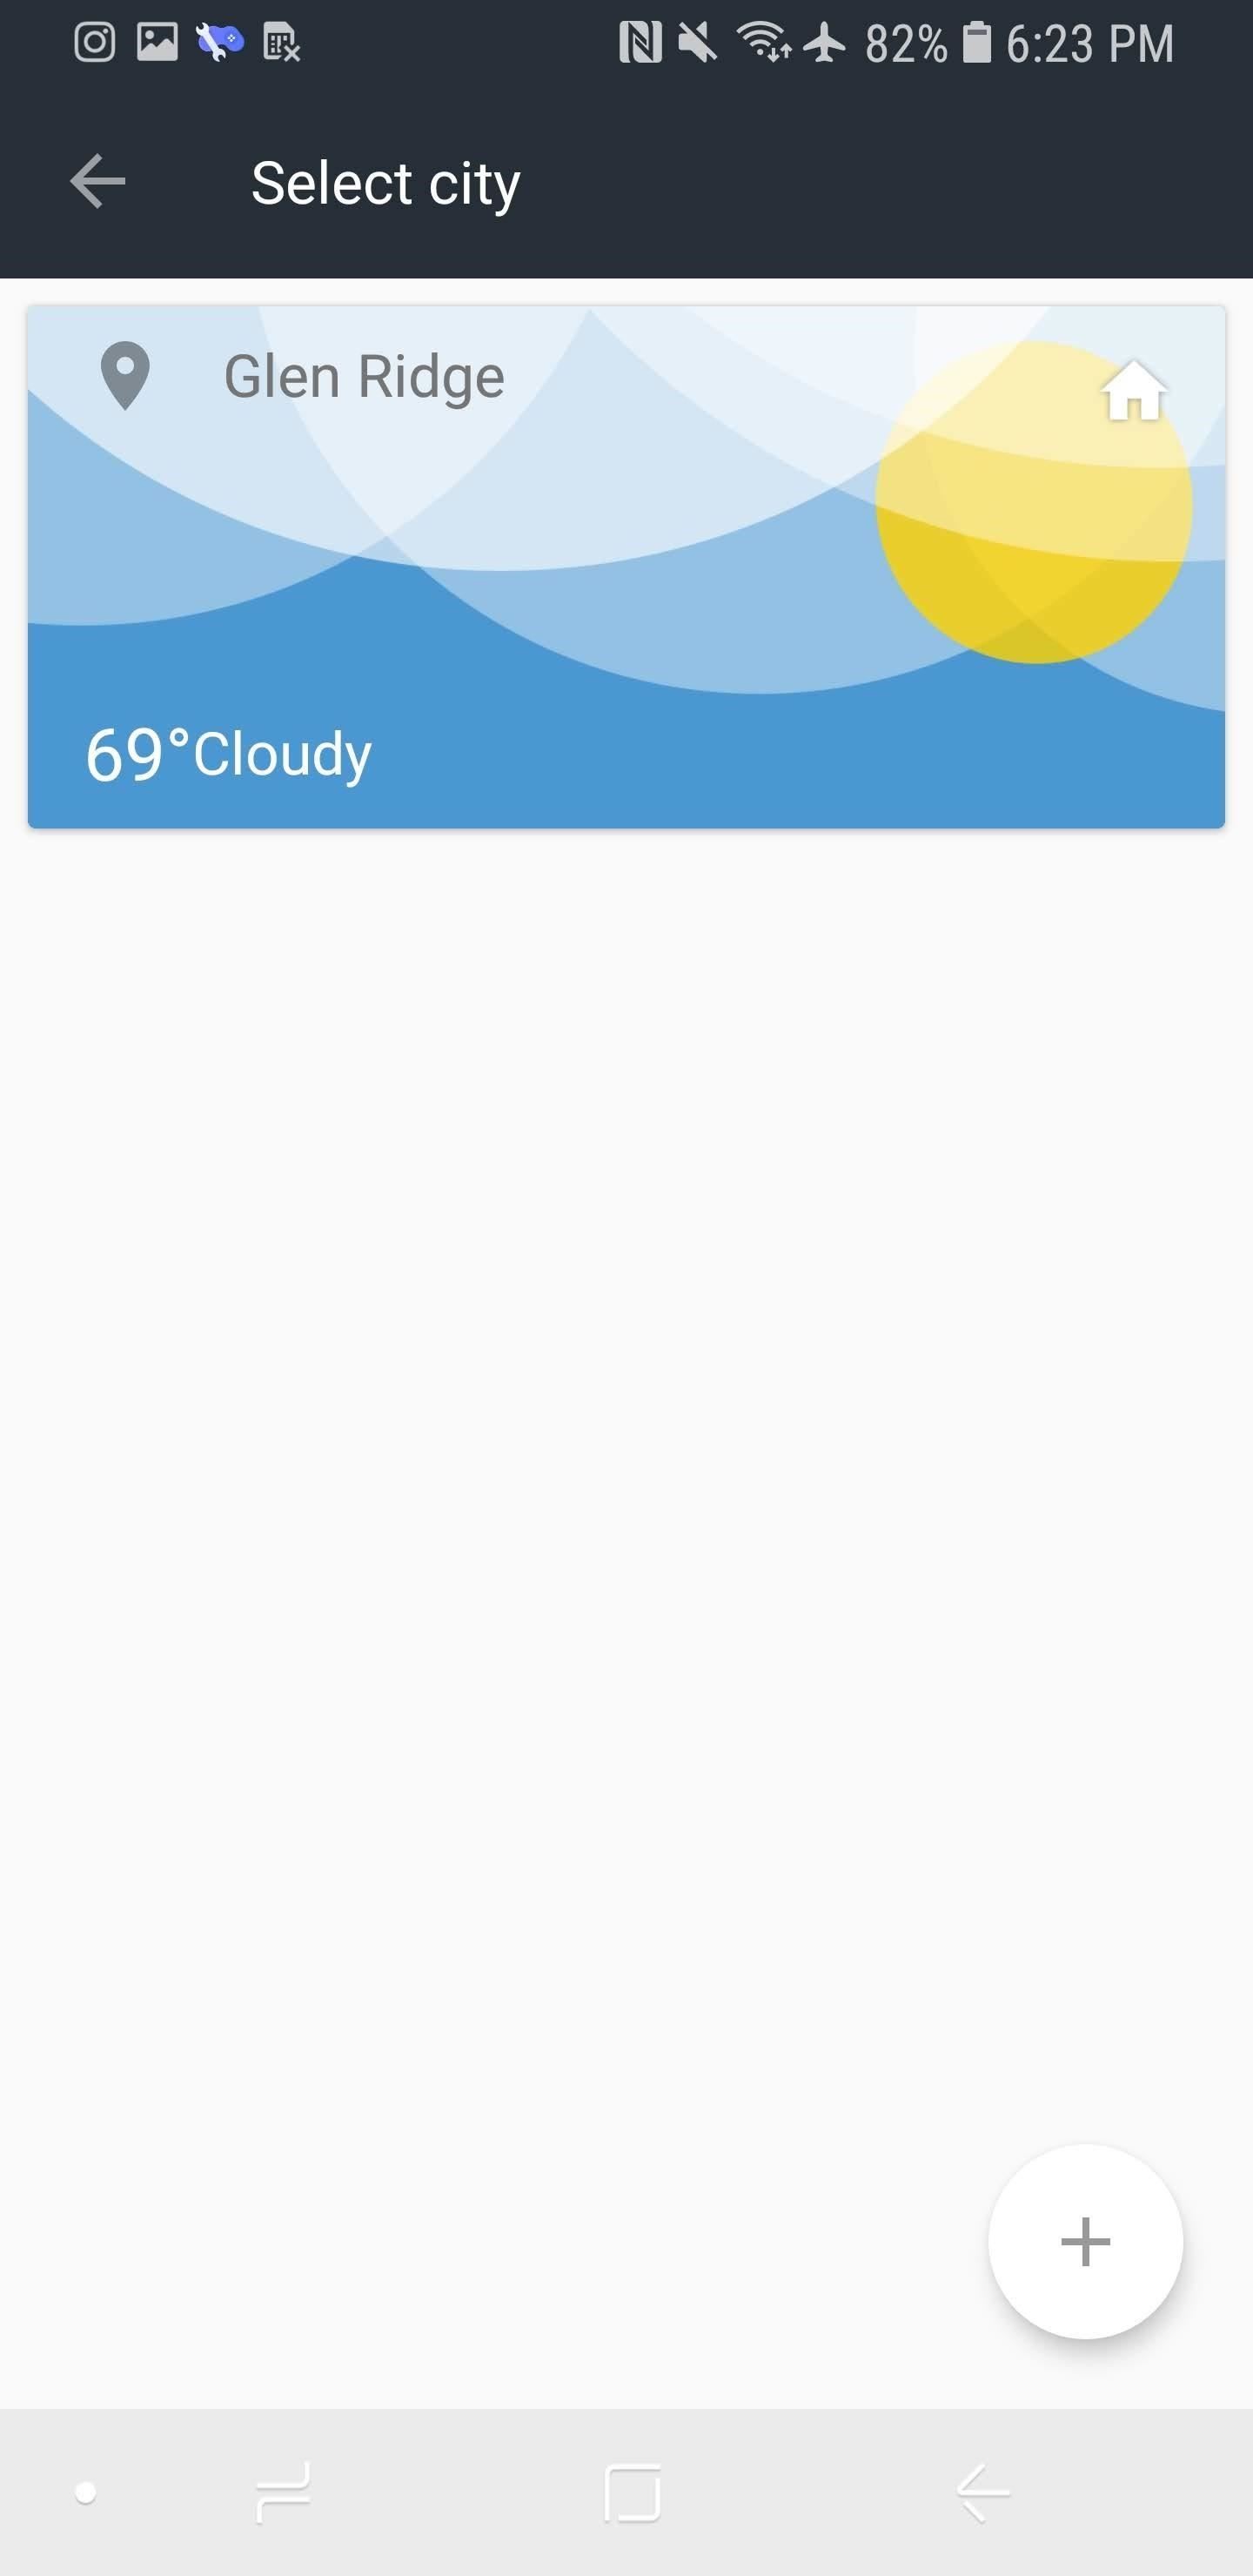 How to Get OnePlus' Gorgeous Weather App on Any Phone